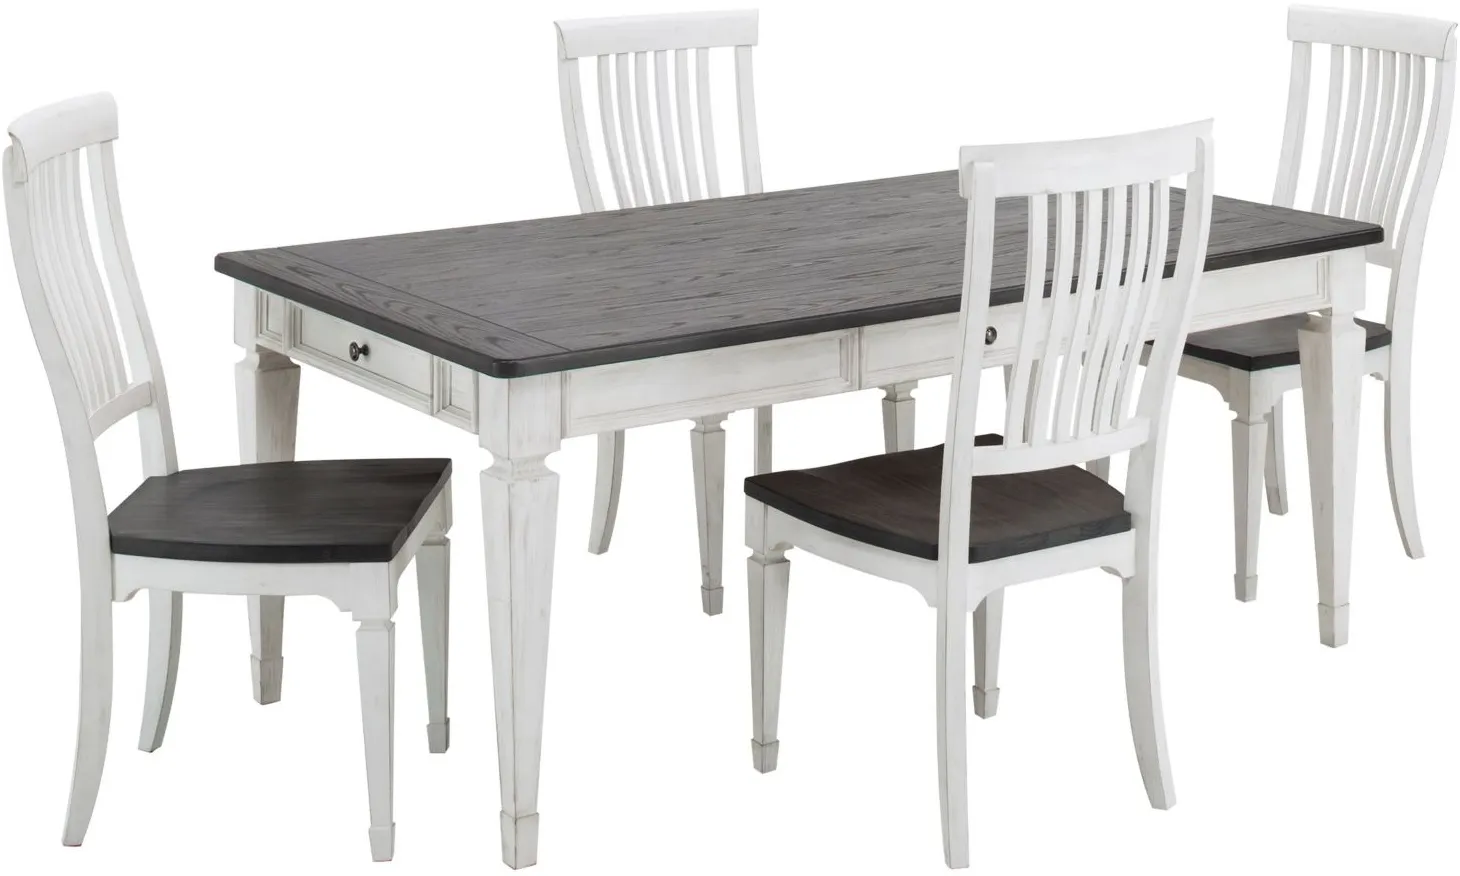 Liberty Furniture Shelby 5-pc. Dining Set in White / Gray by Liberty Furniture